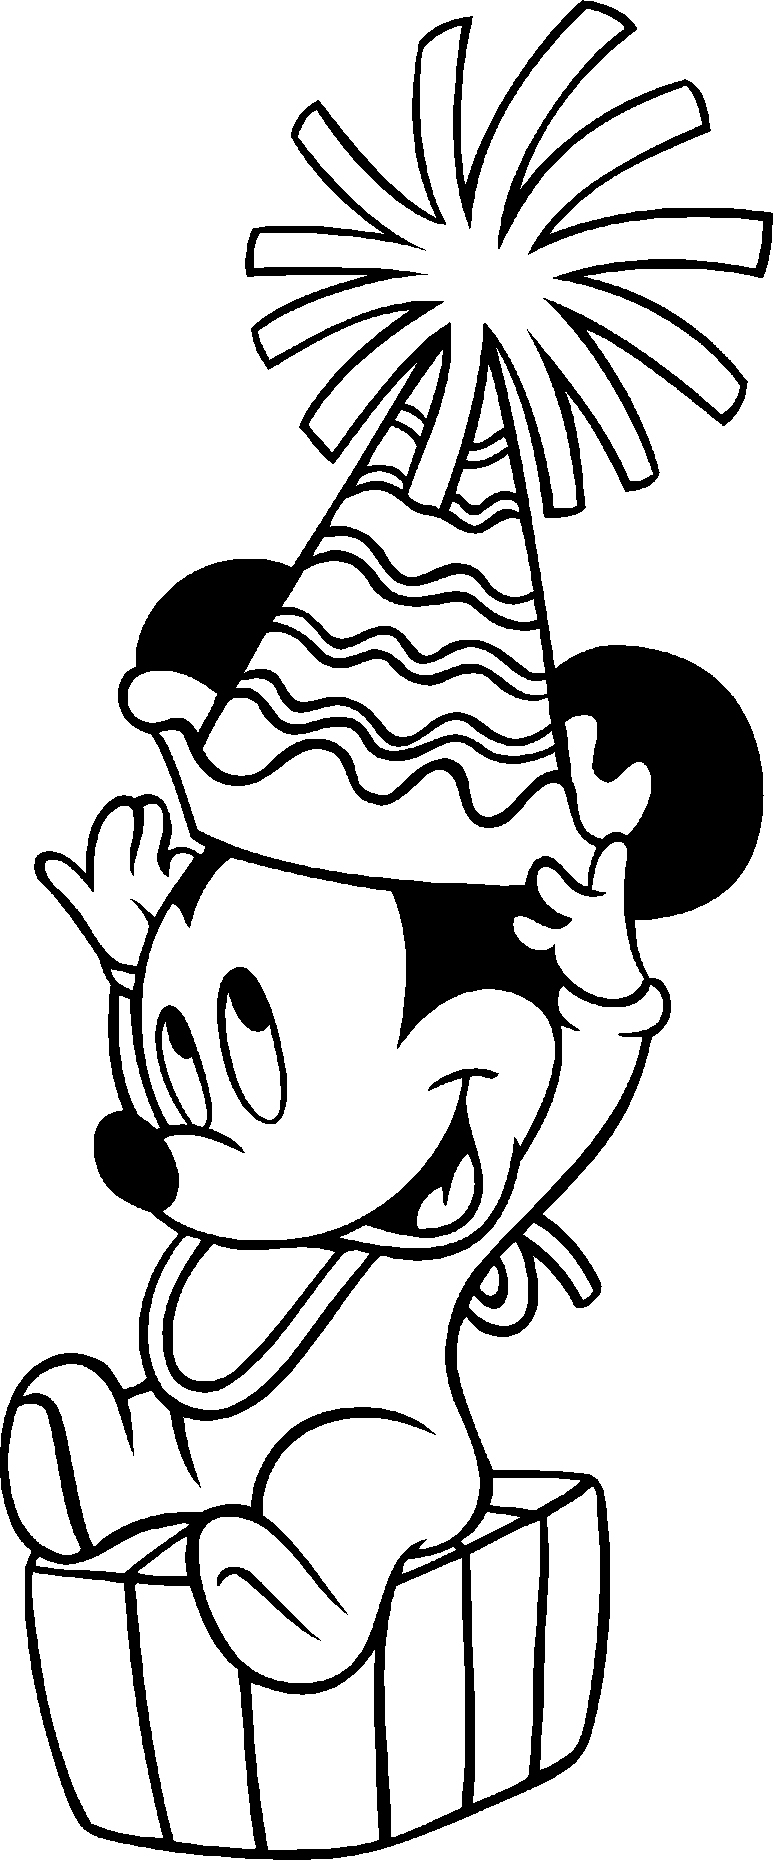 mickey-mouse-birthday-clipart-9-wikiclipart